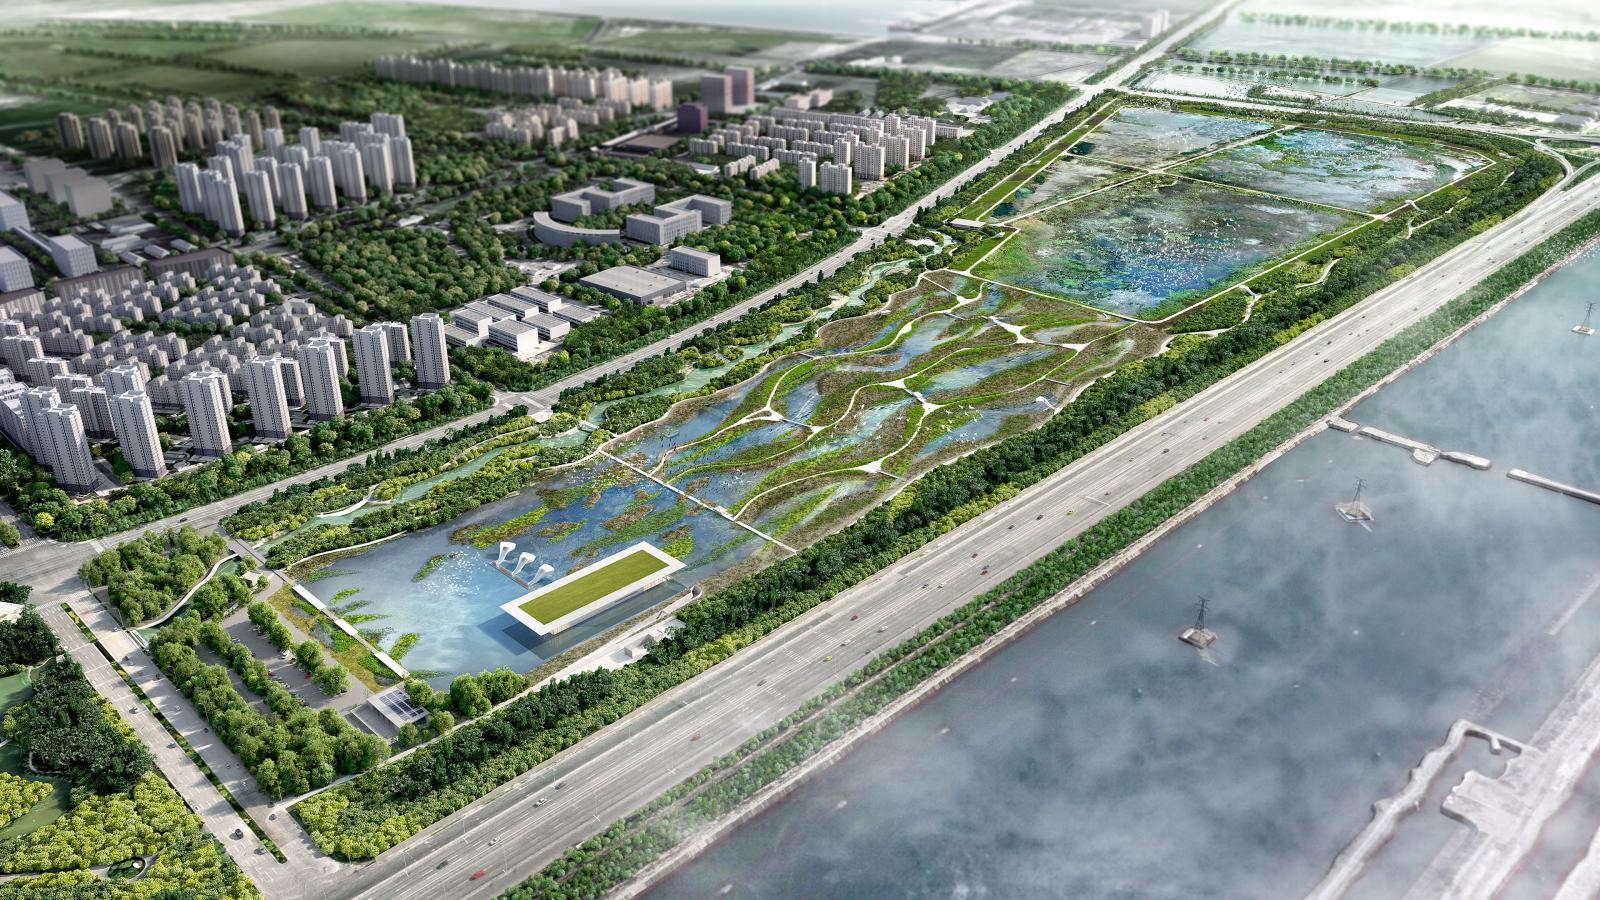 Aerial view of a large urban park beside a river in Lingang. The park features multiple ponds, green spaces, and winding pathways. High-rise buildings and residential areas are situated to the left, while a road and Bird Airport are on the right, with recreational areas in between.